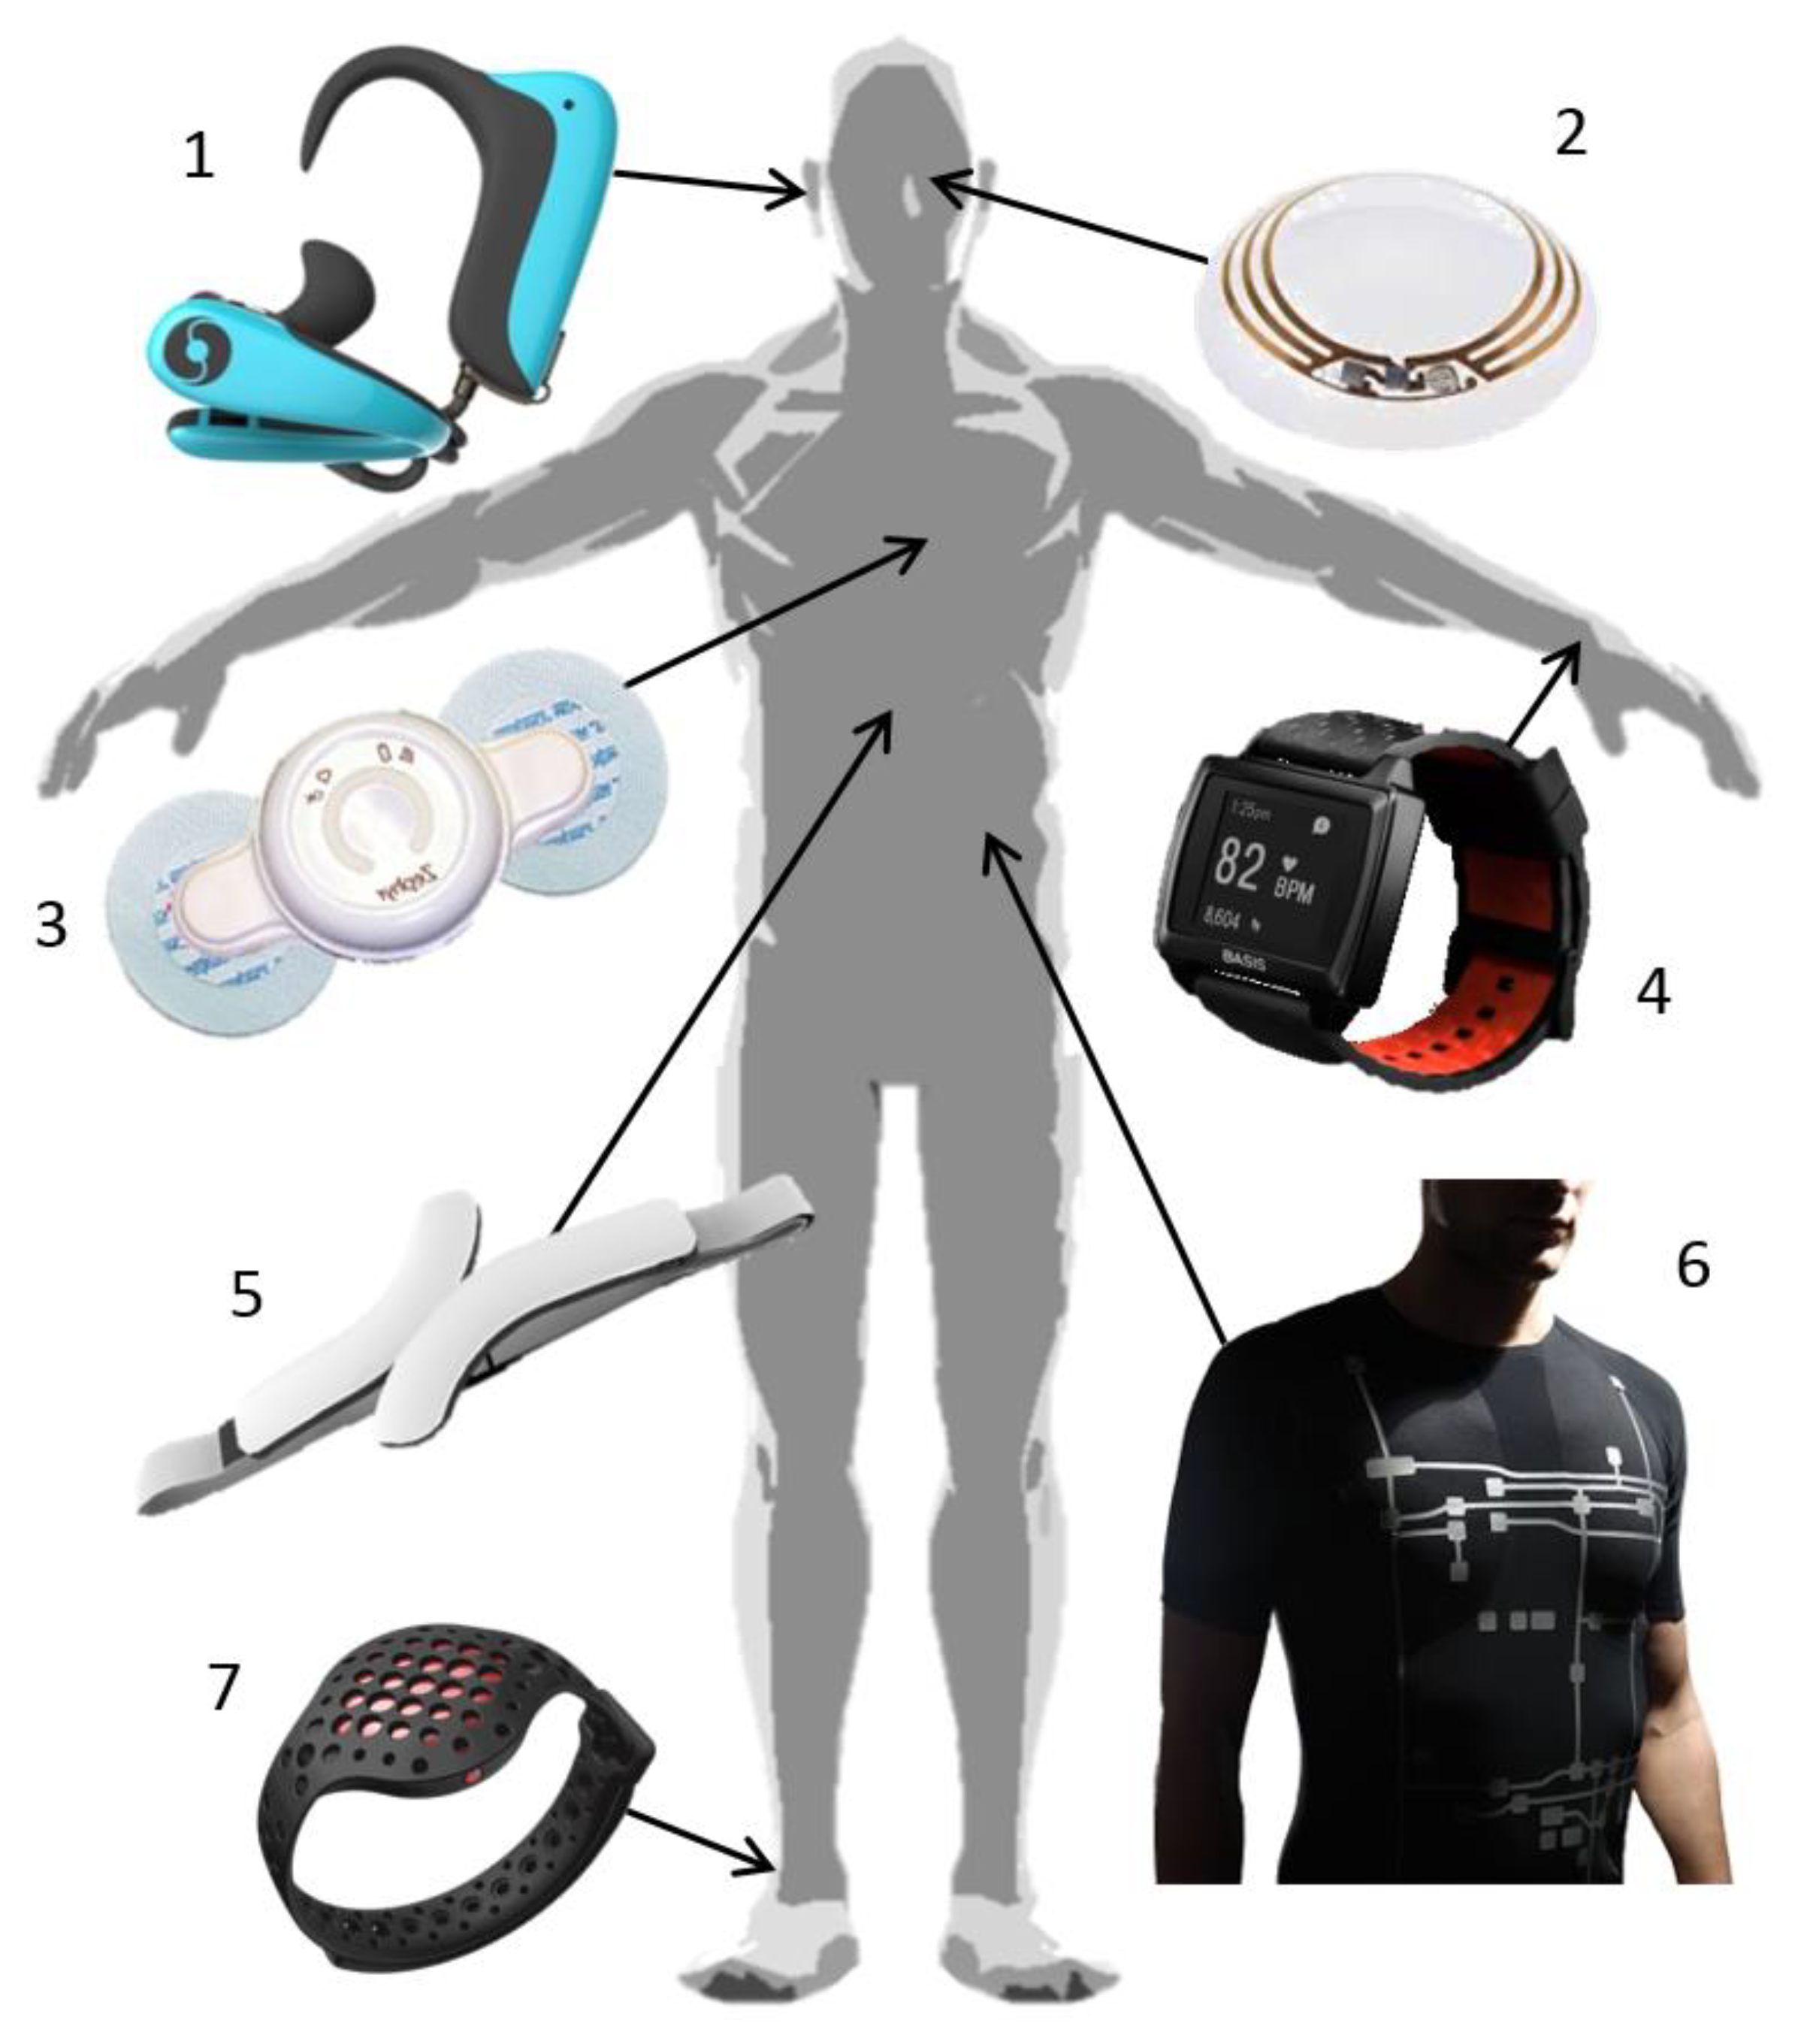 Sensors | Free Full-Text | Wearable Health Devices—Vital Sign Monitoring,  Systems and Technologies